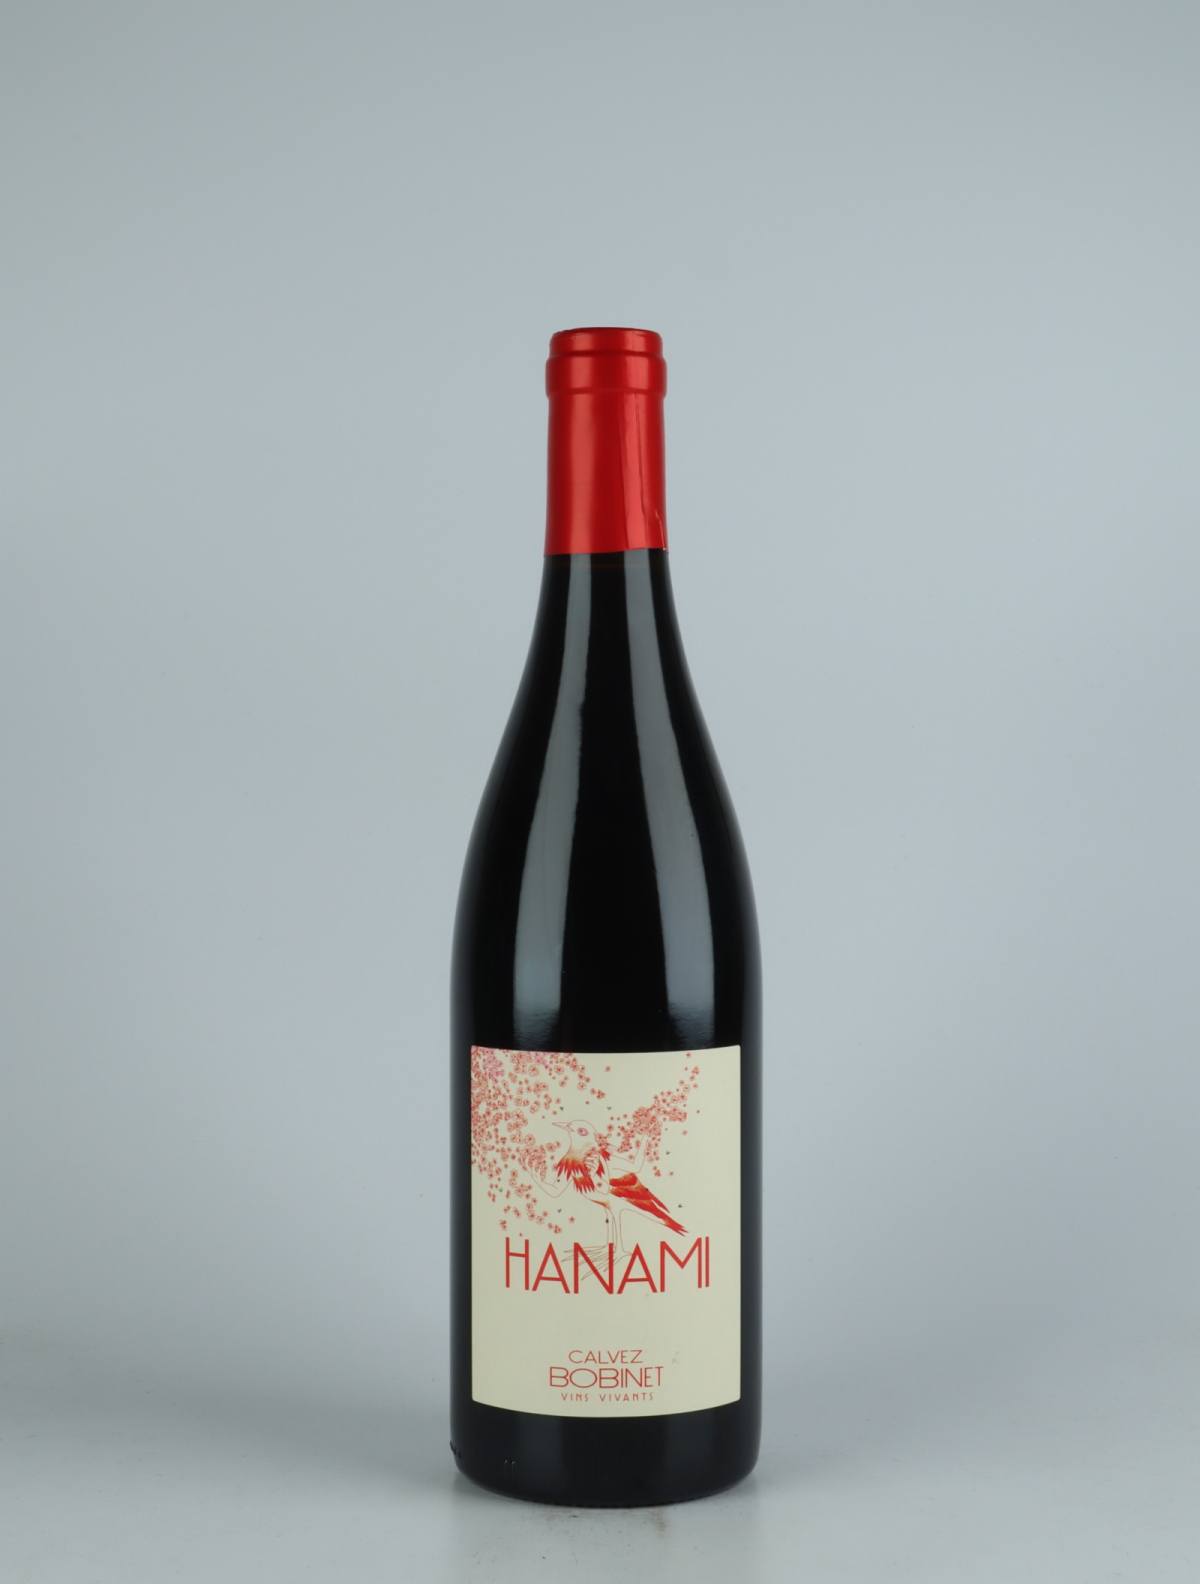 A bottle  Saumur Rouge - Hanami Red wine from Domaine Bobinet, Loire in France